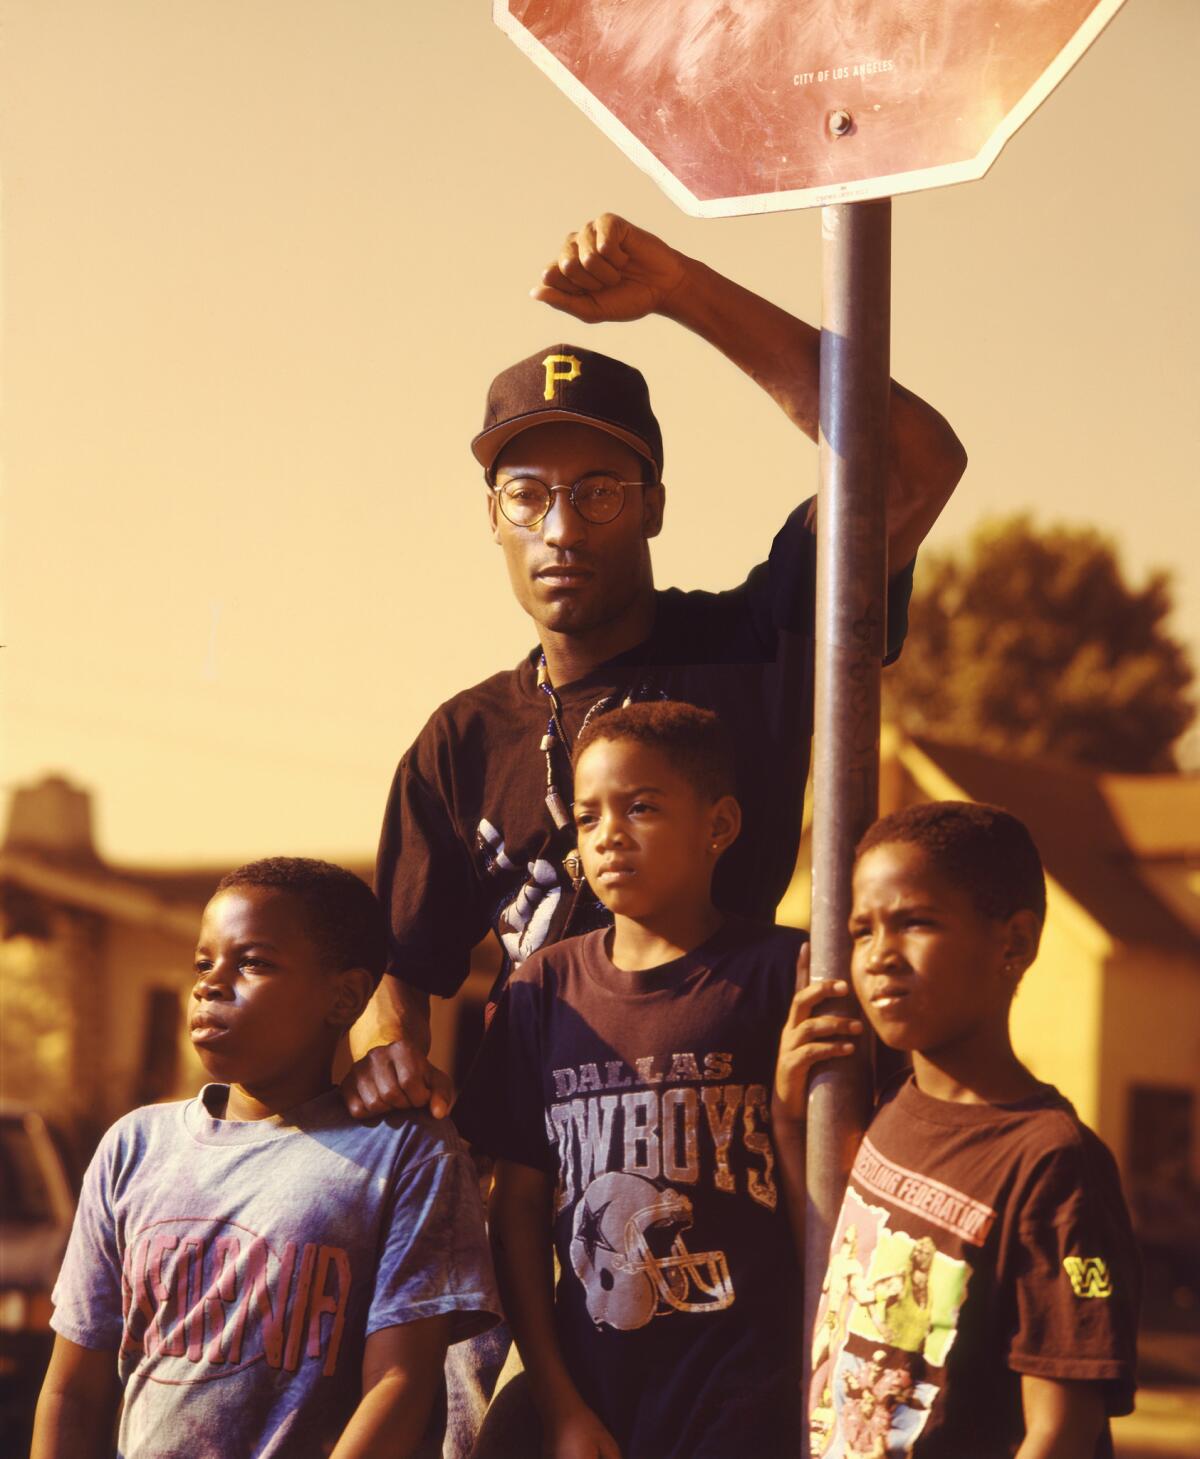 John Singleton during the shoot for "Boyz N the Hood," which was released in 1991 and earned him an Academy Award nomination for directing.